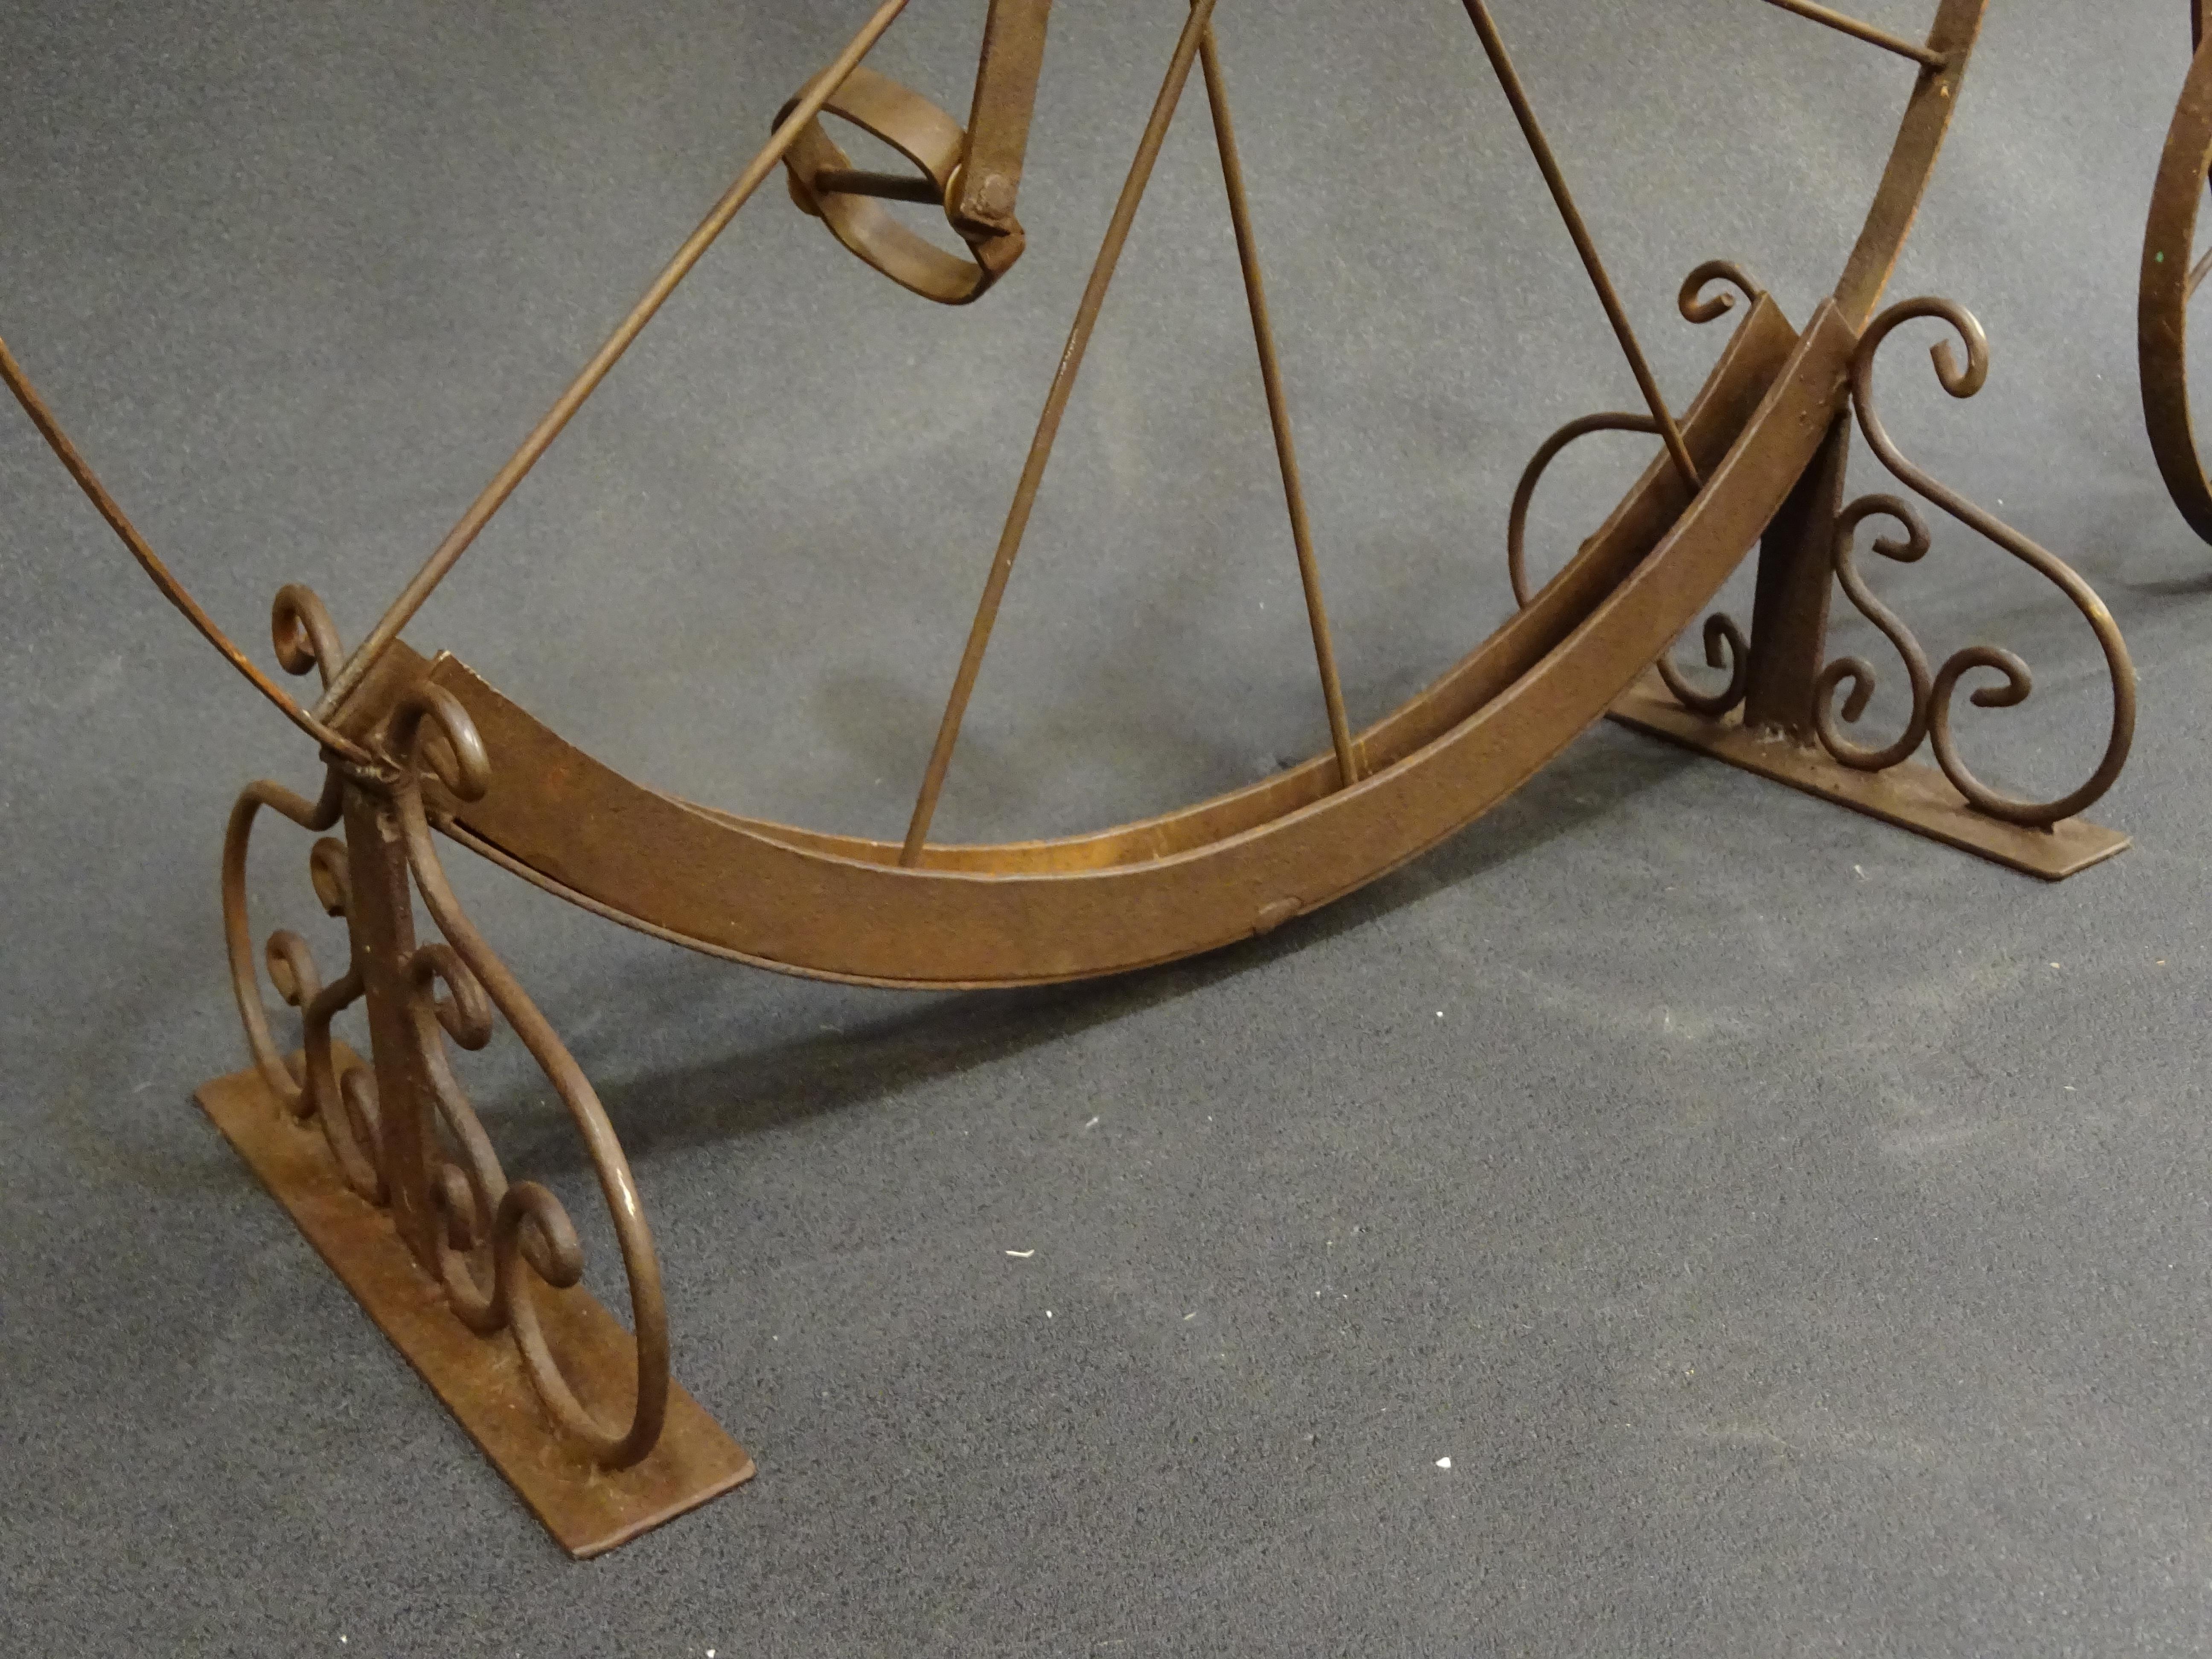 Hand-Crafted 1900 Penny-Farthing English  Bycicle , Wrought-Iron, Wood, Leather, for Children